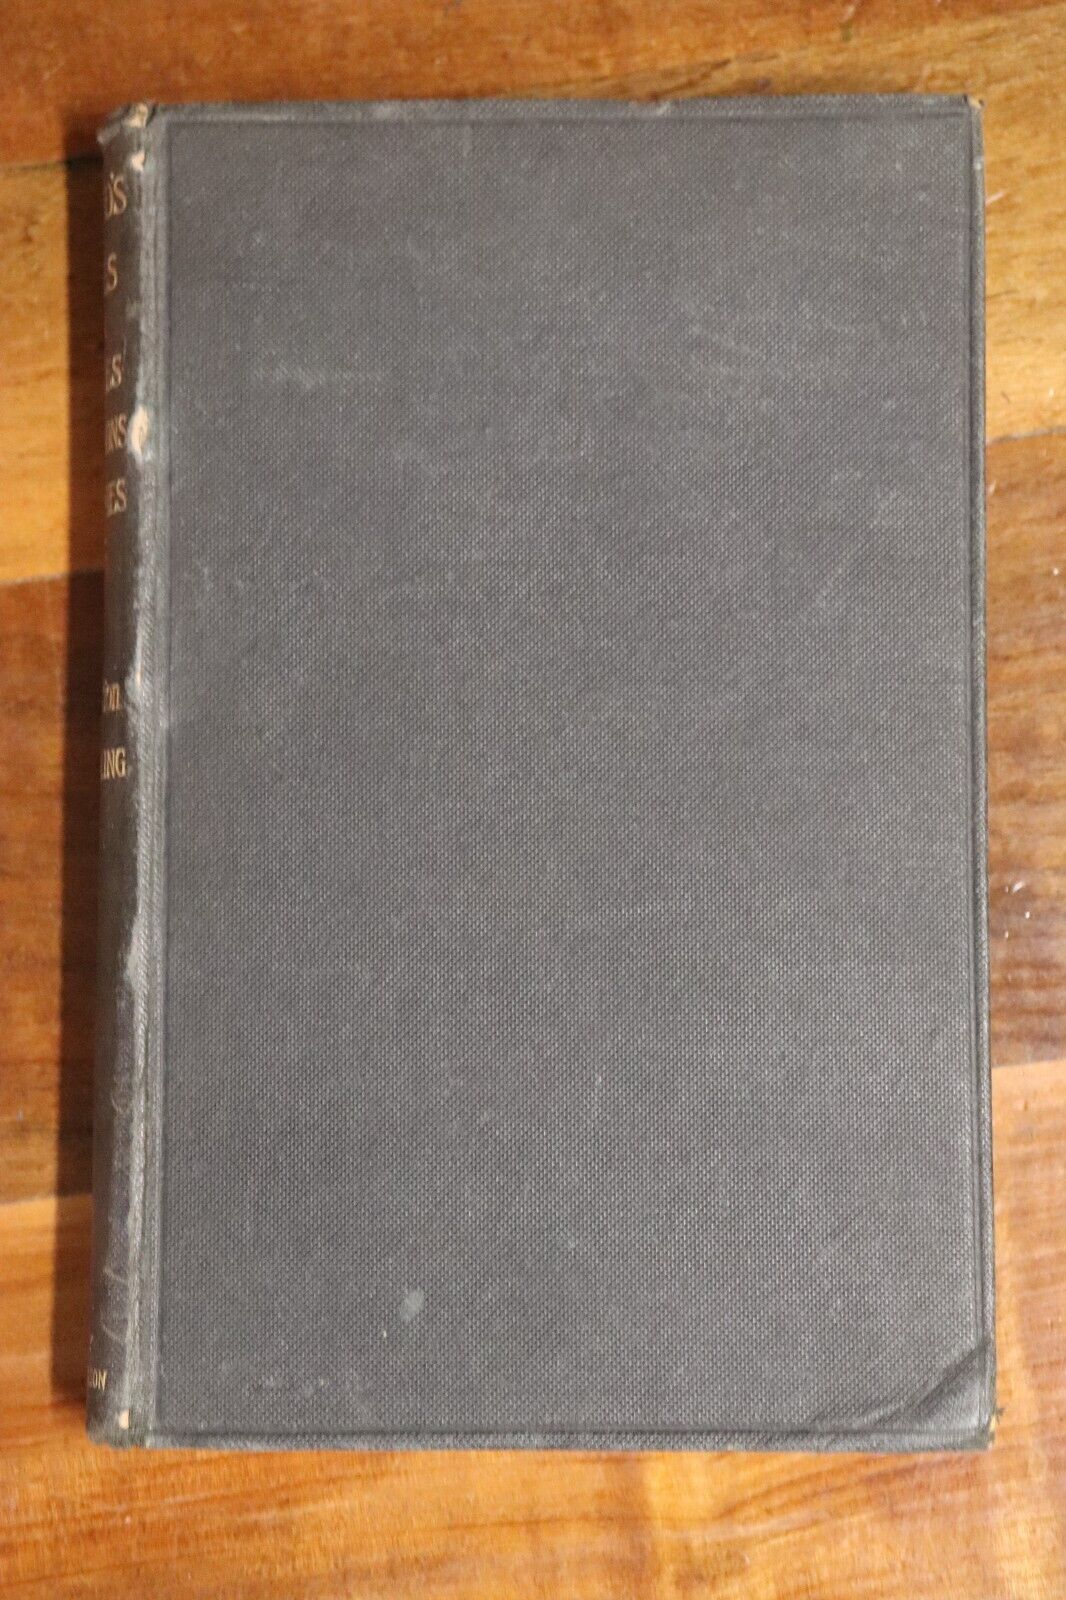 Inwood's Tables For Estates & Properties - 1920 - Antique Finance Book